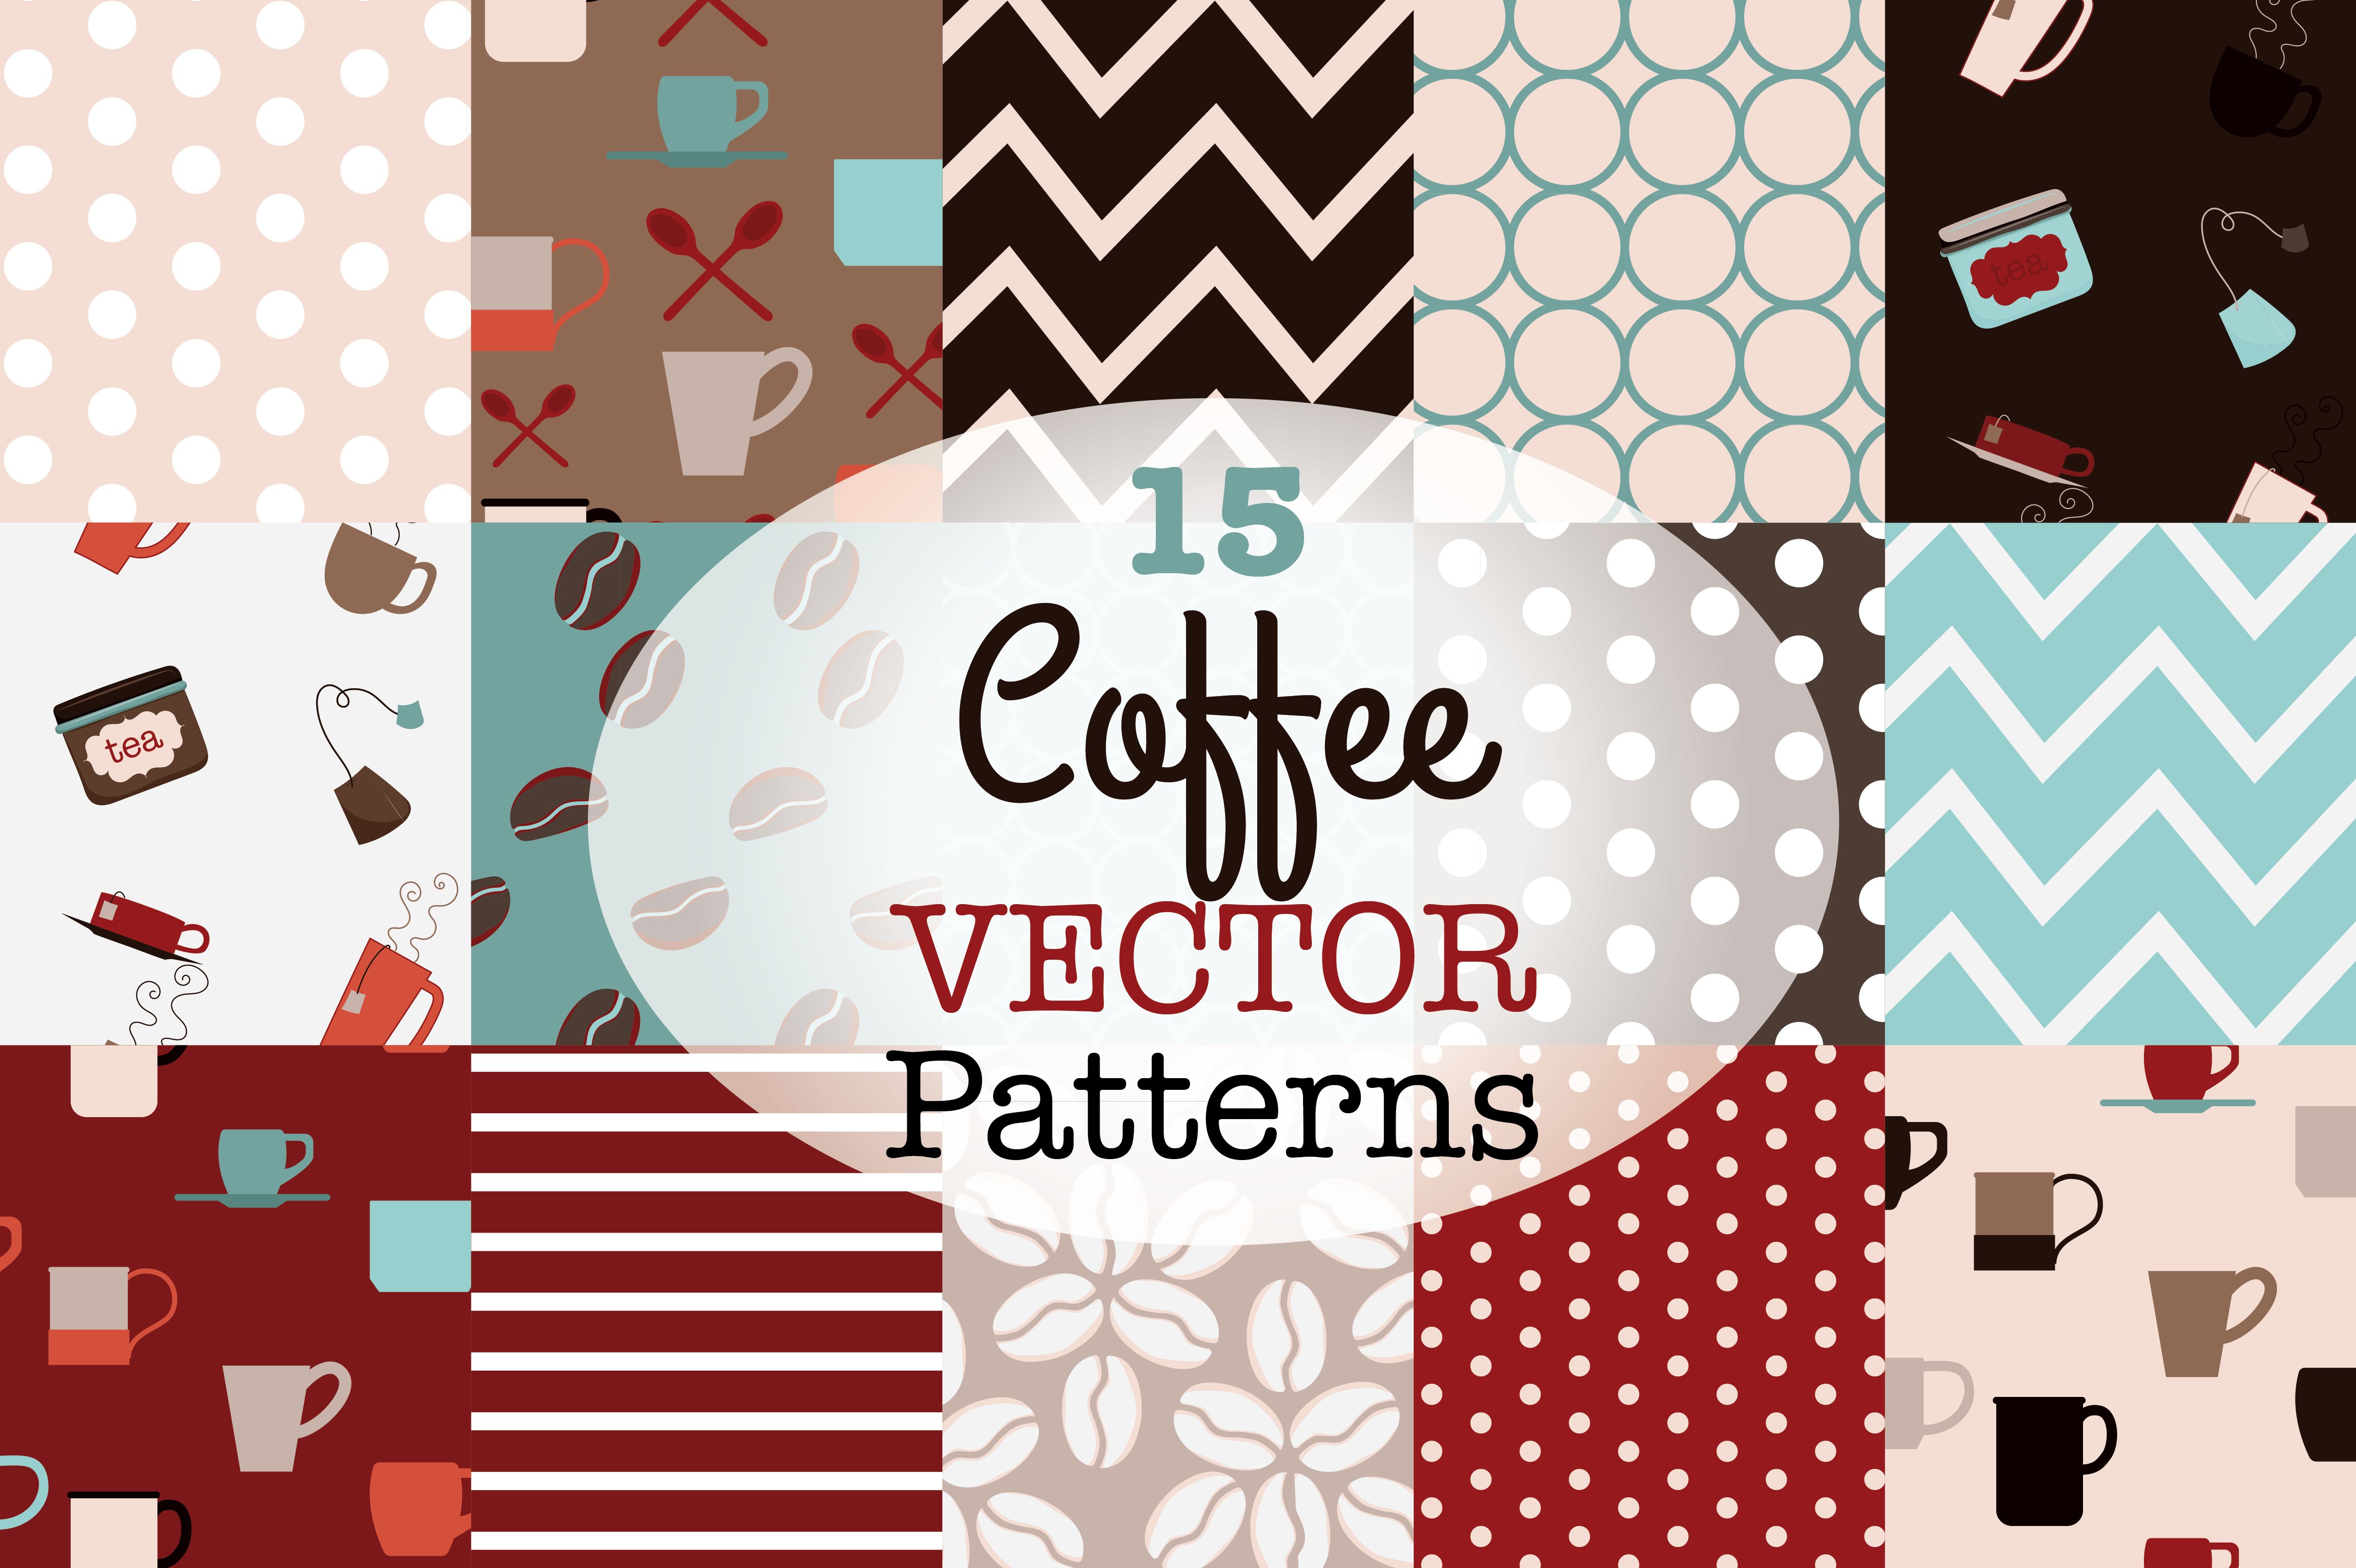 Coffee and Tea Vector Patterns cover image.